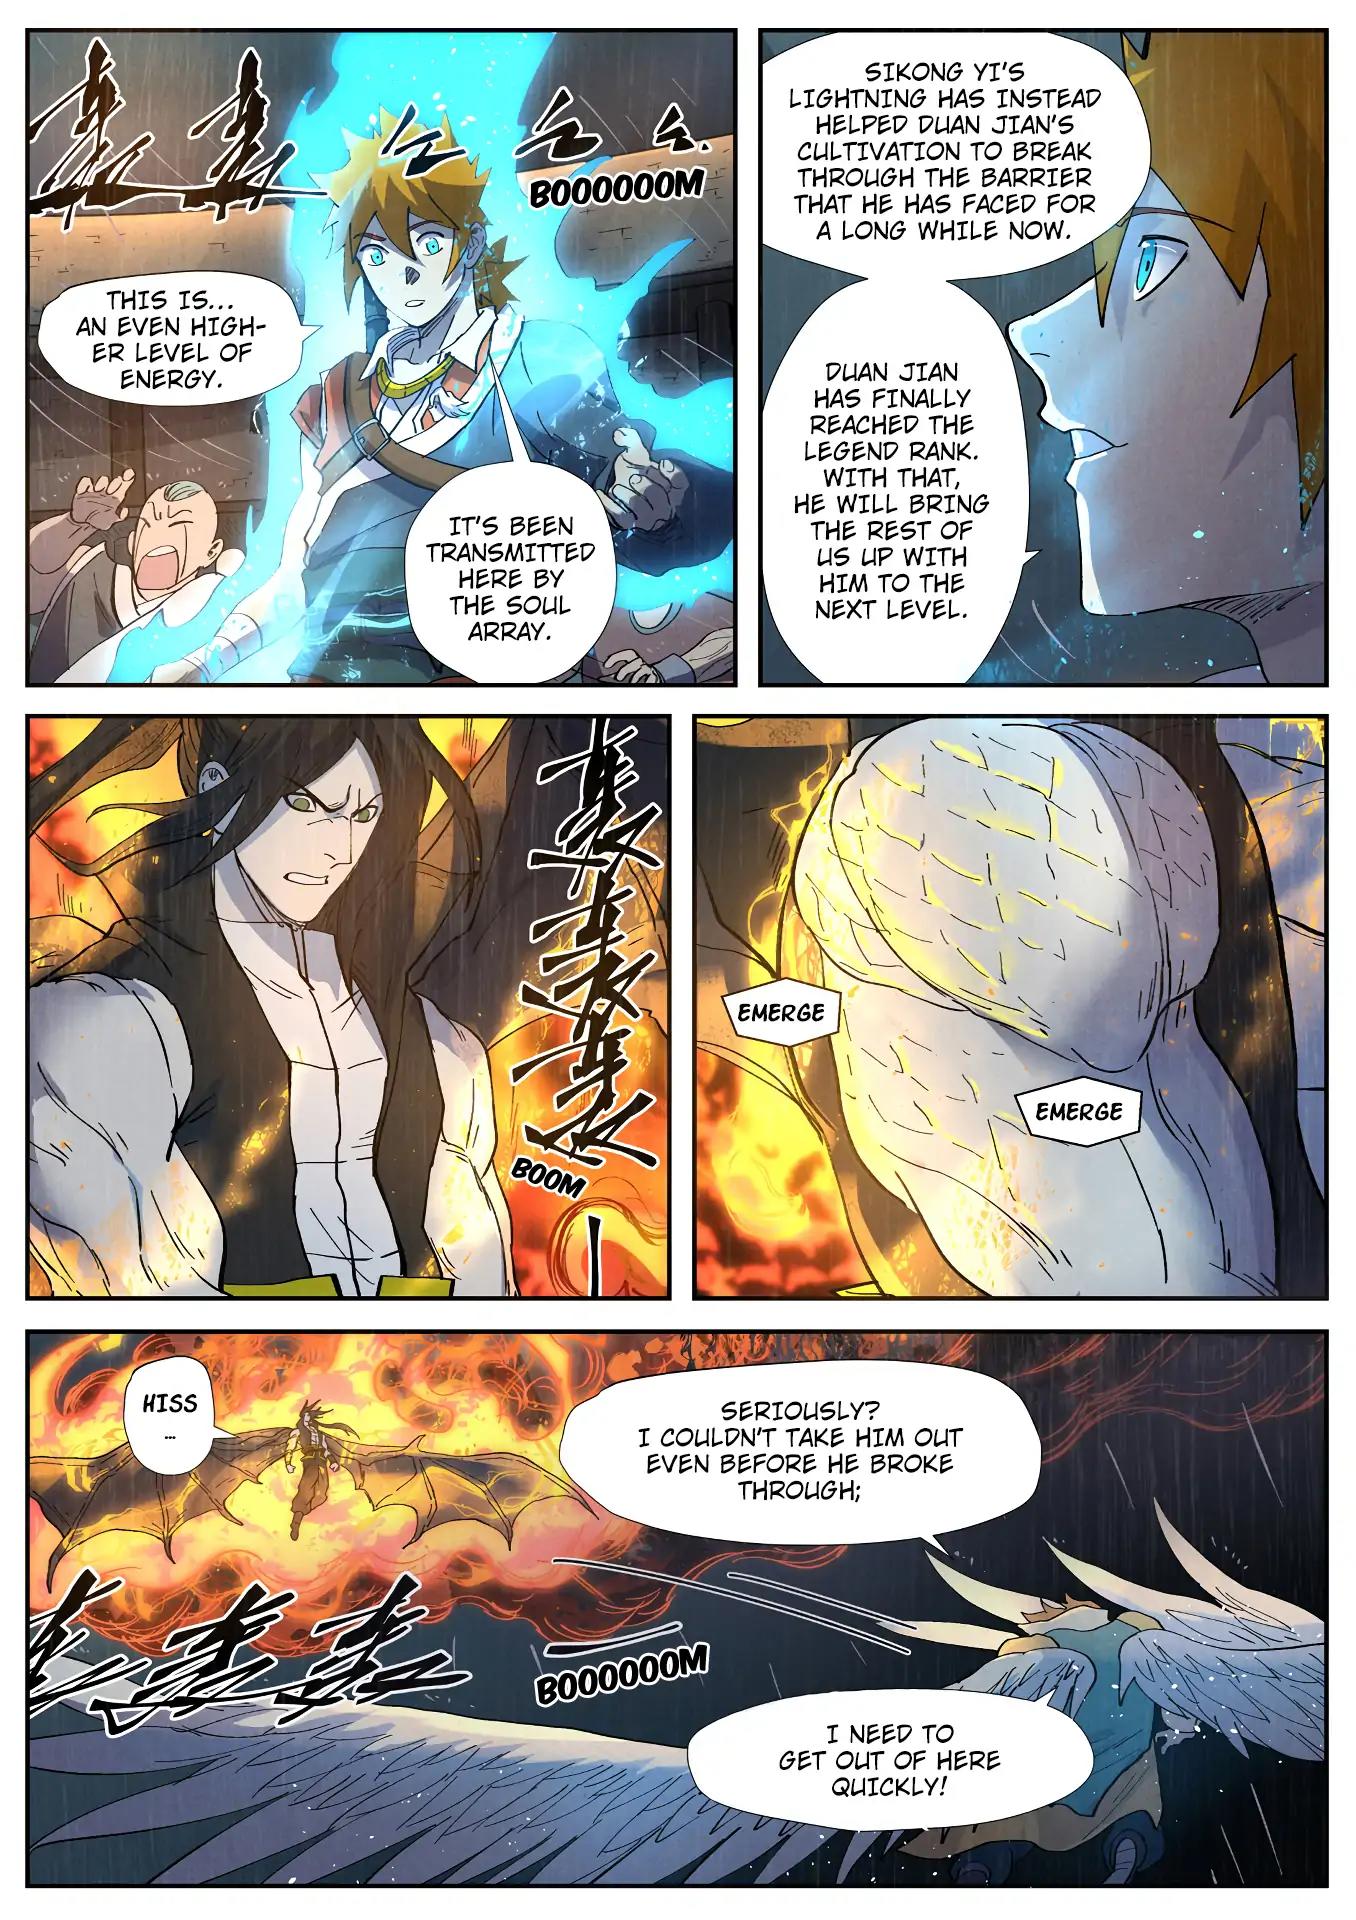 Tales of Demons and Gods Chapter 247.5: